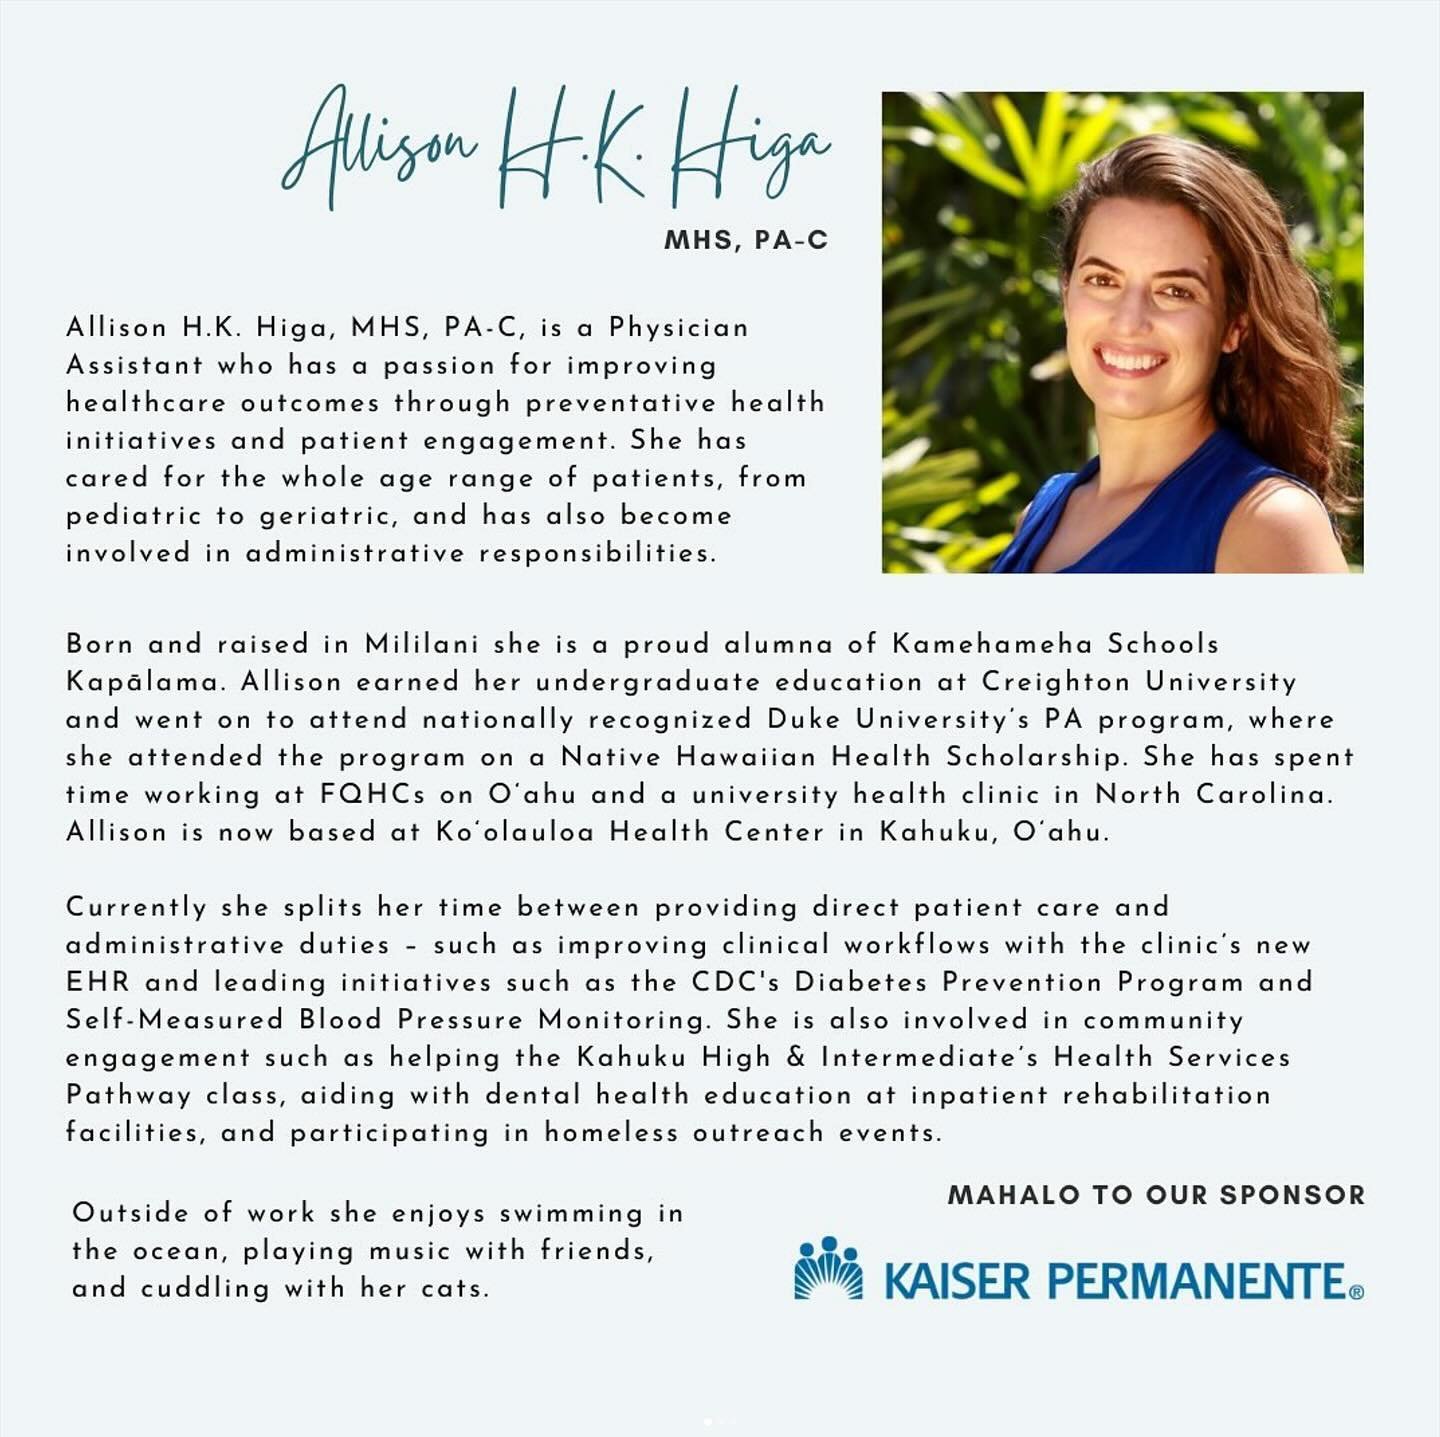 Aloha &lsquo;Ohana!

We are very proud to announce that KHC&rsquo;s Allison H.K. Higa will be speaking at the upcoming Hoʻōla 2024 Conference. Way to go Allison!

The Hoʻōla 2024 Conference is organized by Hawaii Primary Care Association and focuses 